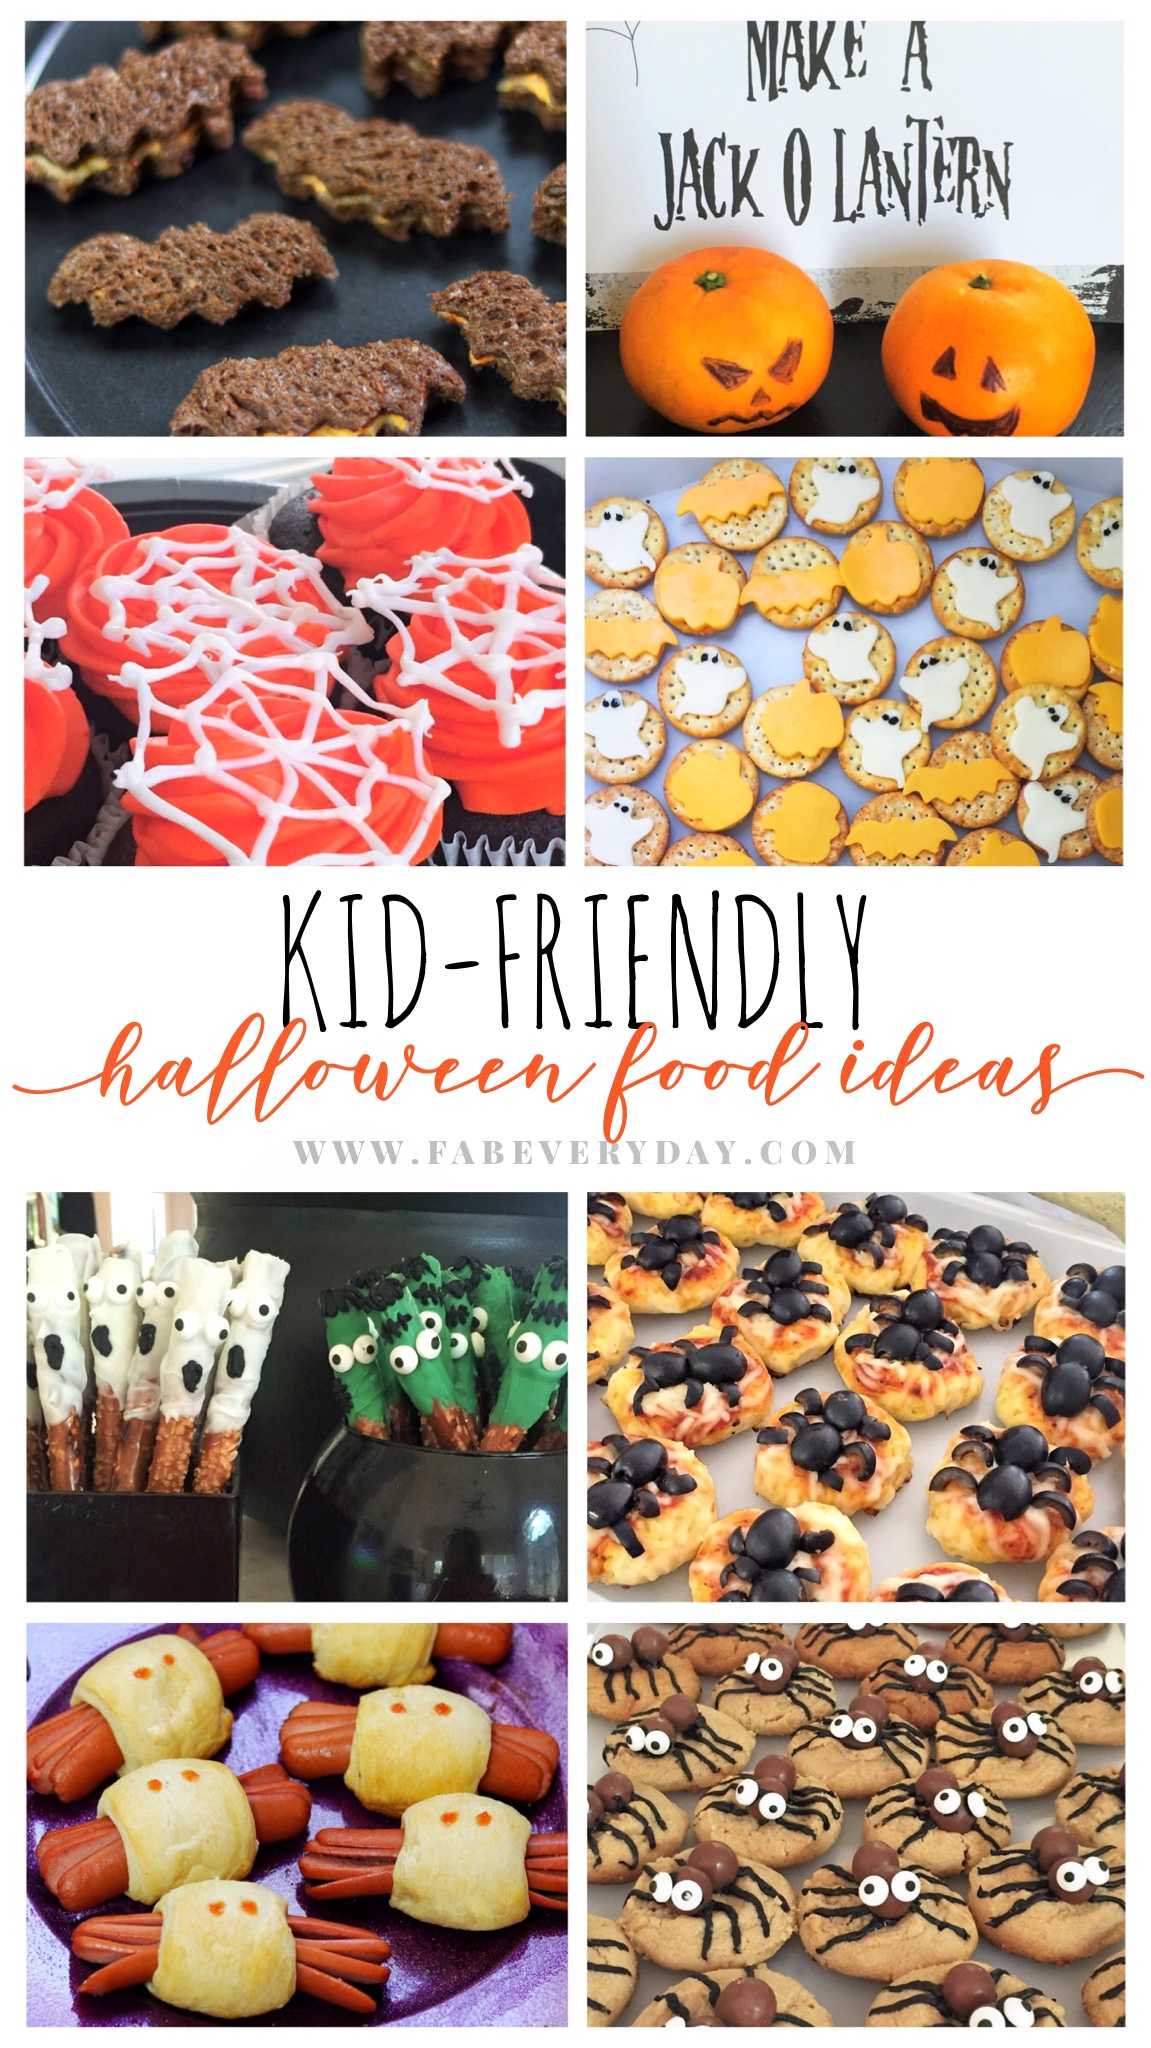 Kid-friendly, fun (and not scary) Halloween food ideas for kids. These are great easy Halloween treats for parties.